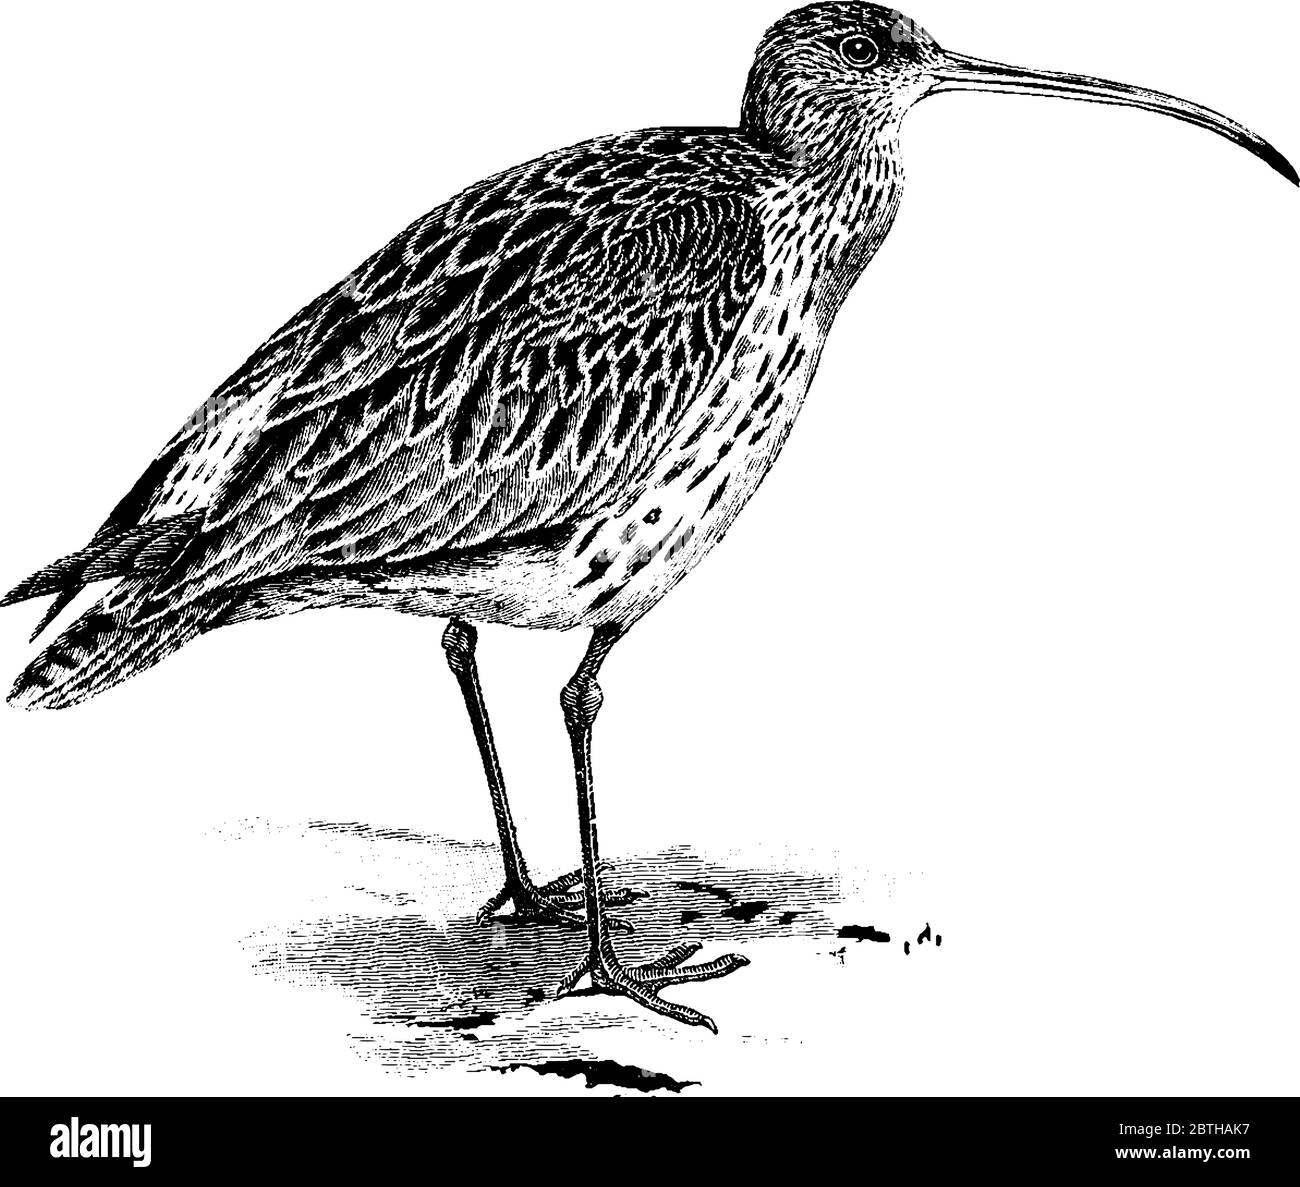 The curlew is the largest European wading bird in the large family Scolopacidae. It has long, slender, down curved bills and mottled brown plumage., v Stock Vector